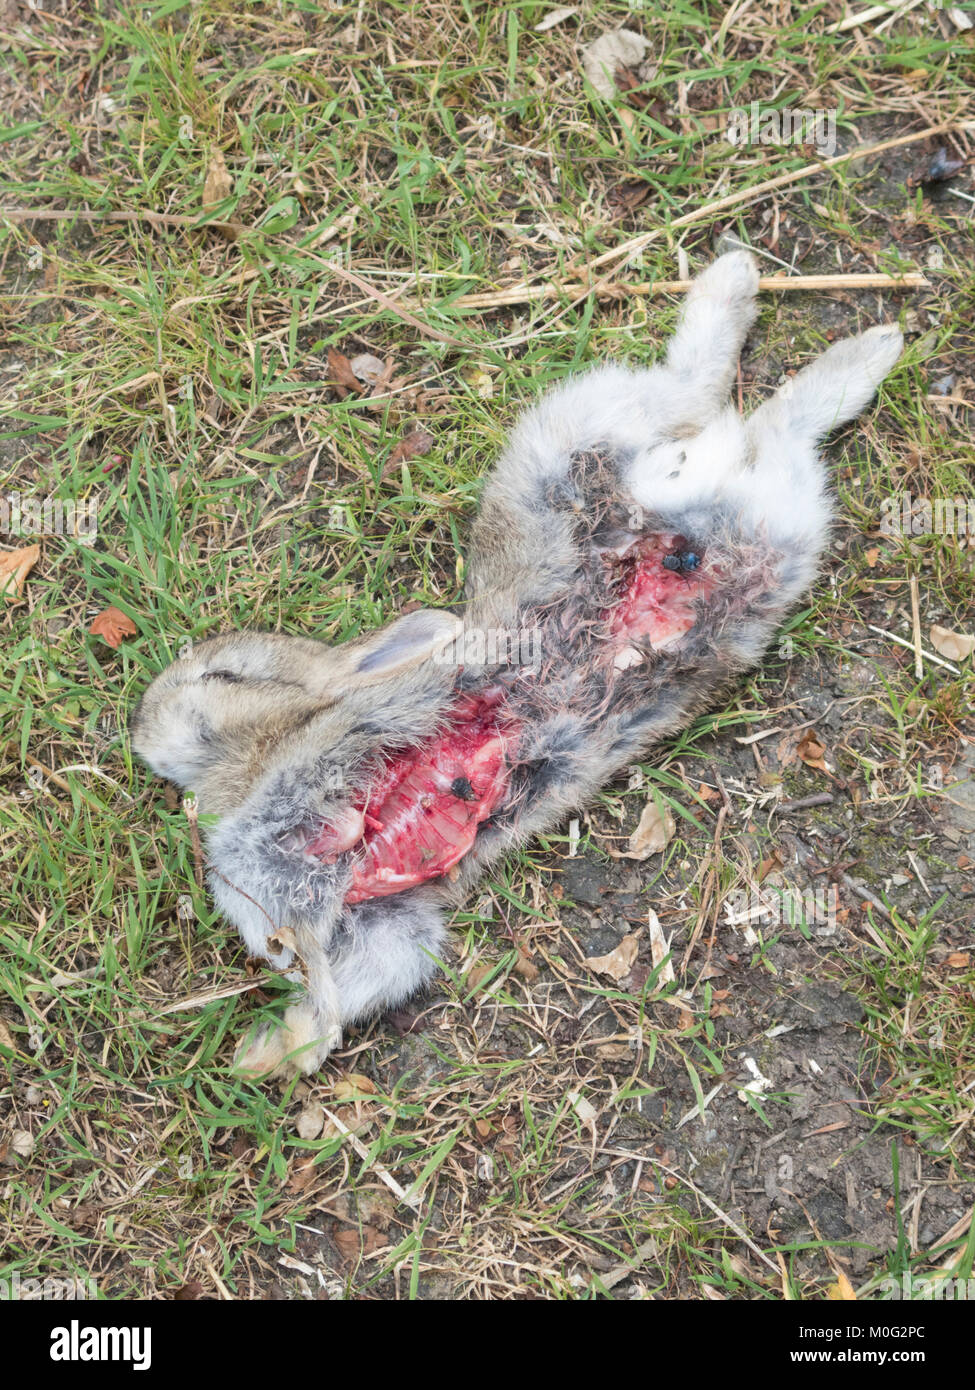 Lapin sauvage mort ( Oryctolagus cuniculus ), UK Banque D'Images